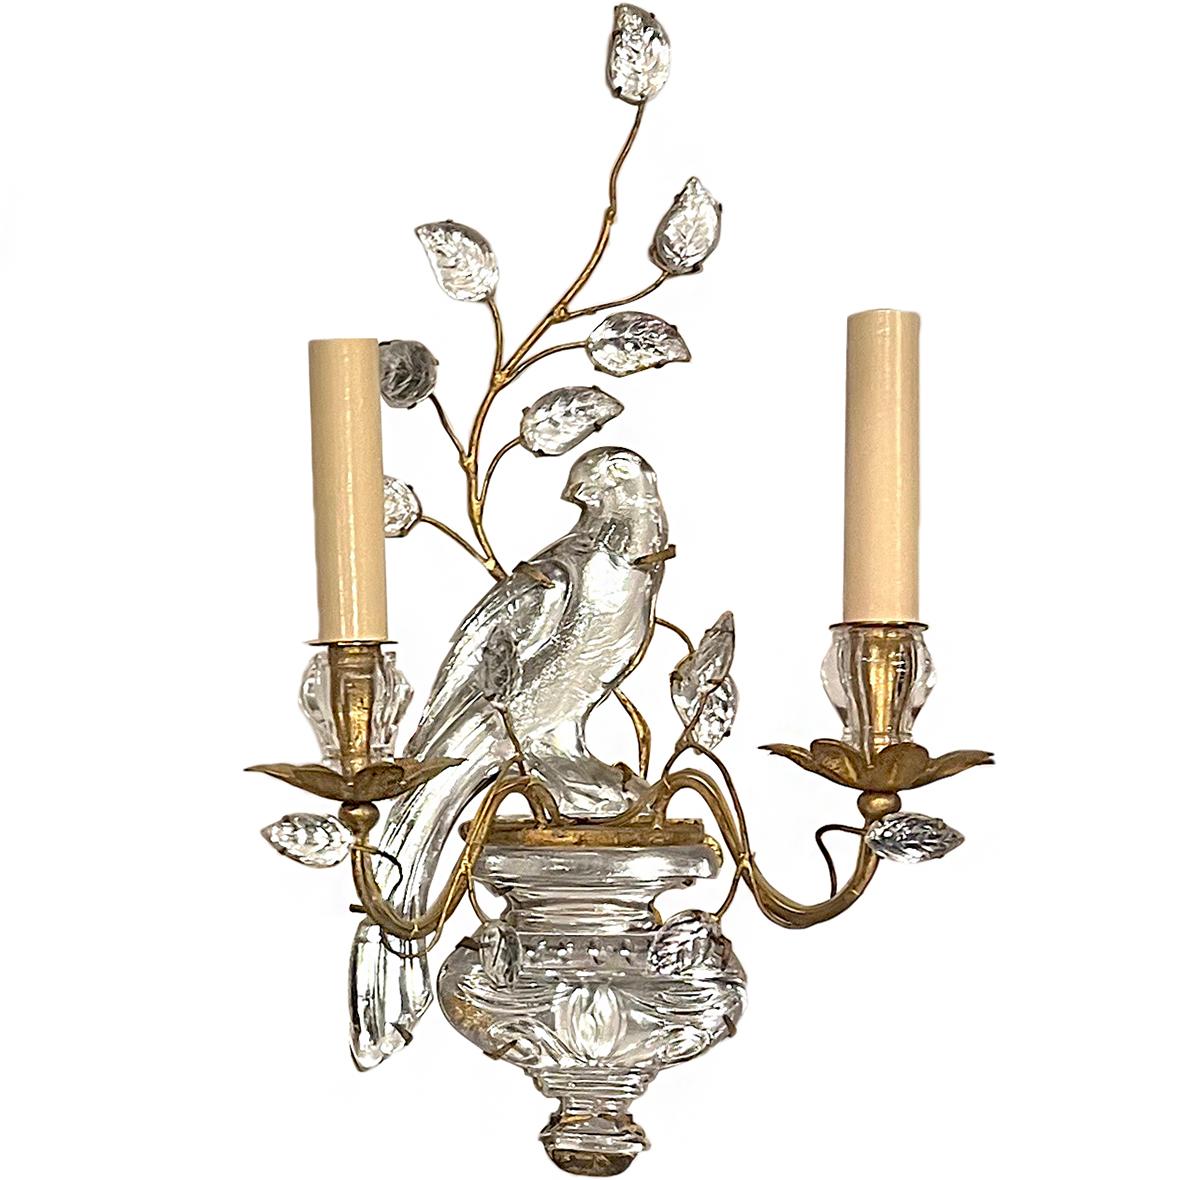 A set of six circa 1960's French sconces with molded glass bird and leaves and gold leaf body. Sold in pairs.

Measurements:
Height: 17